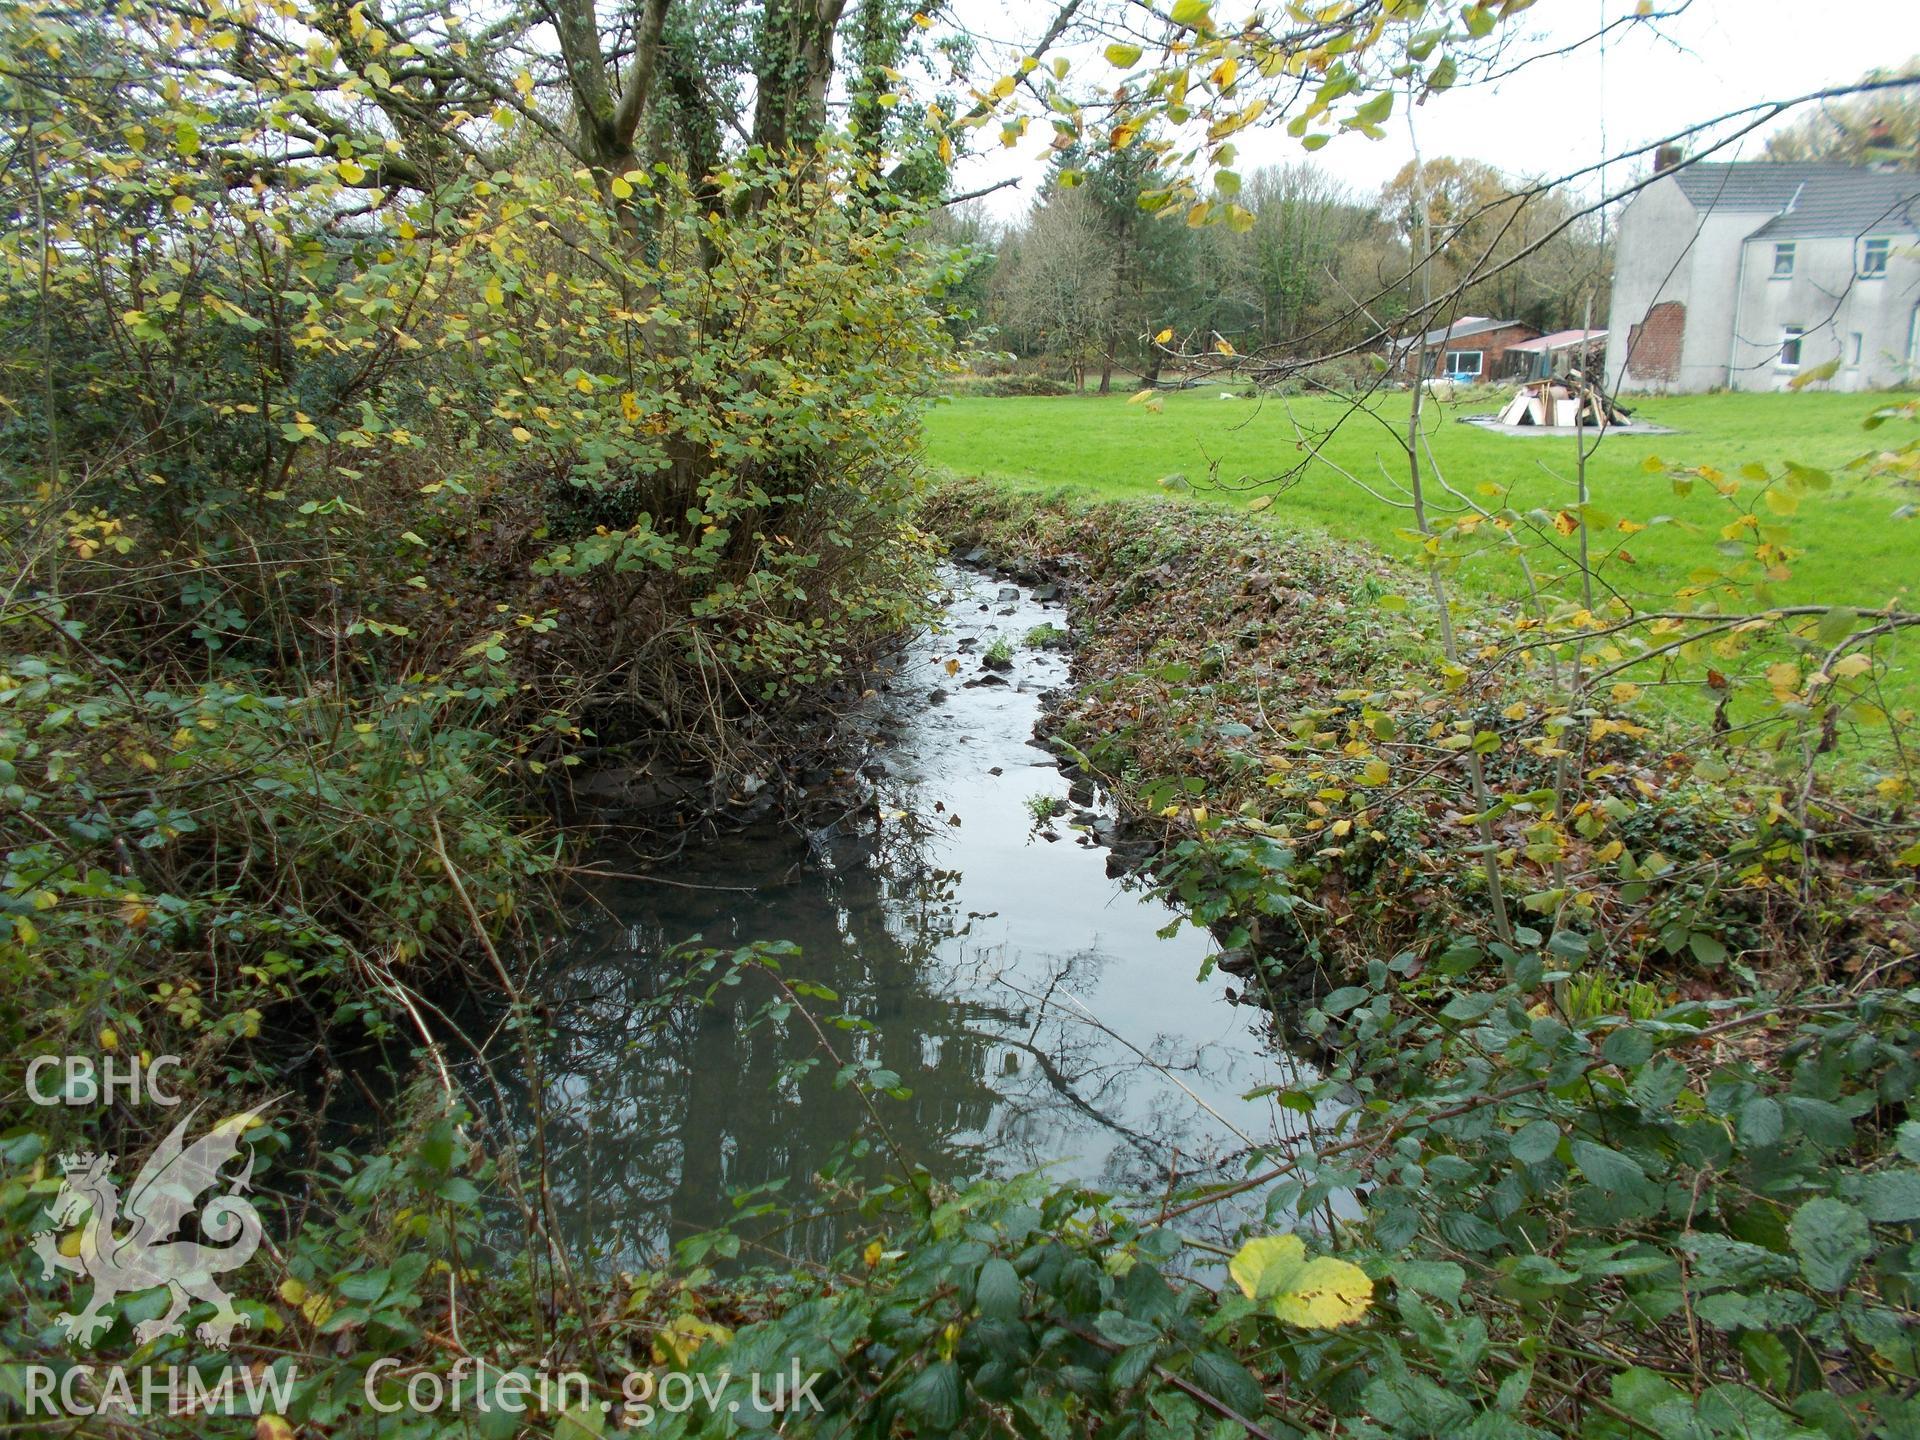 View north west. Outflow of storm drain and stream past Pentre Bach to the north of site. Photographed as part of the desk based assessment of Heol Pentre Bach, Gorseinon, conducted by Archaeology Wales in 2015.